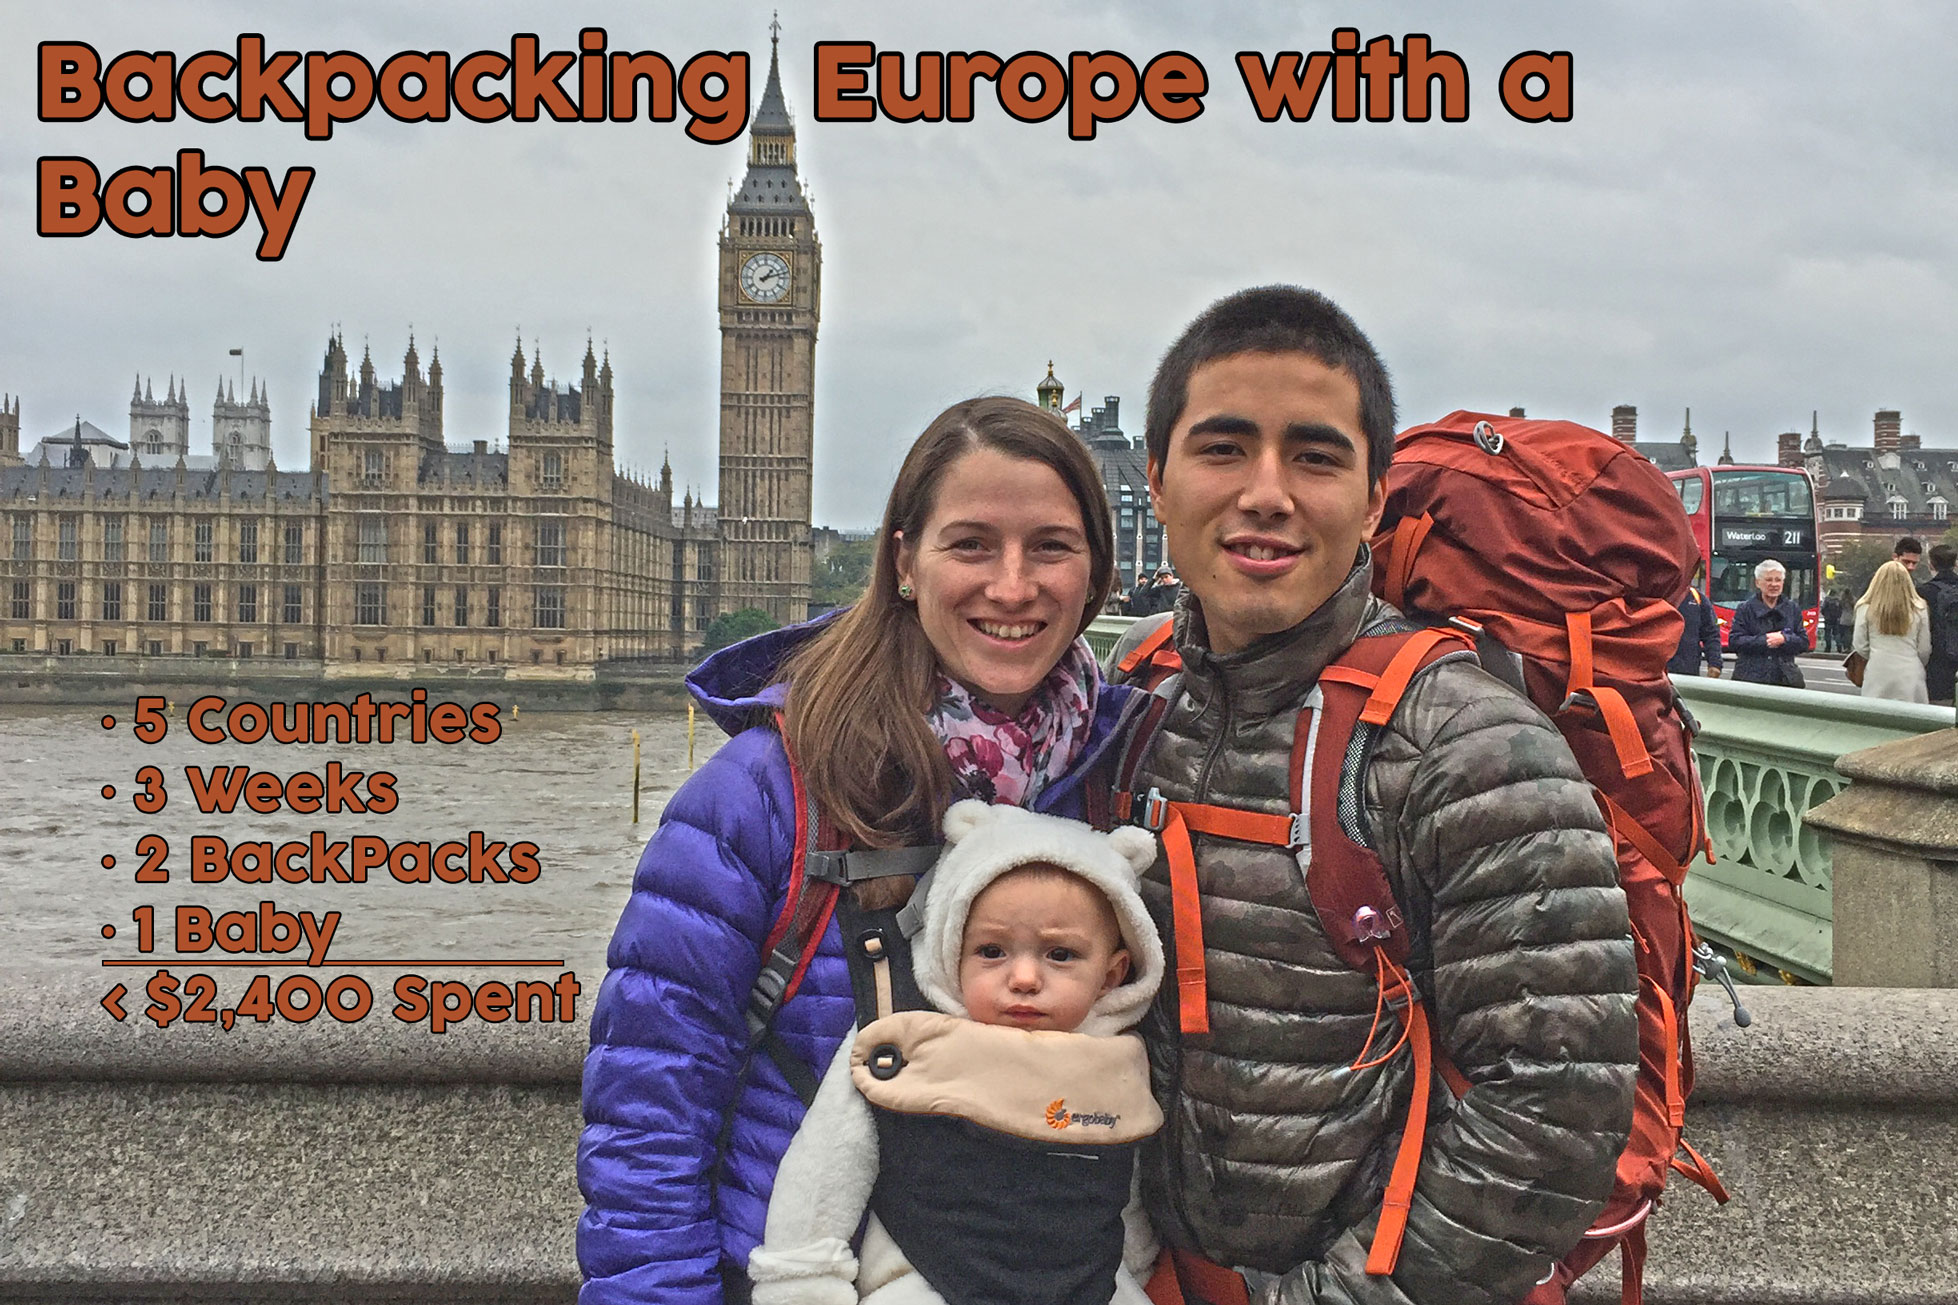 Backpacking Europe with a Baby – FamVestor